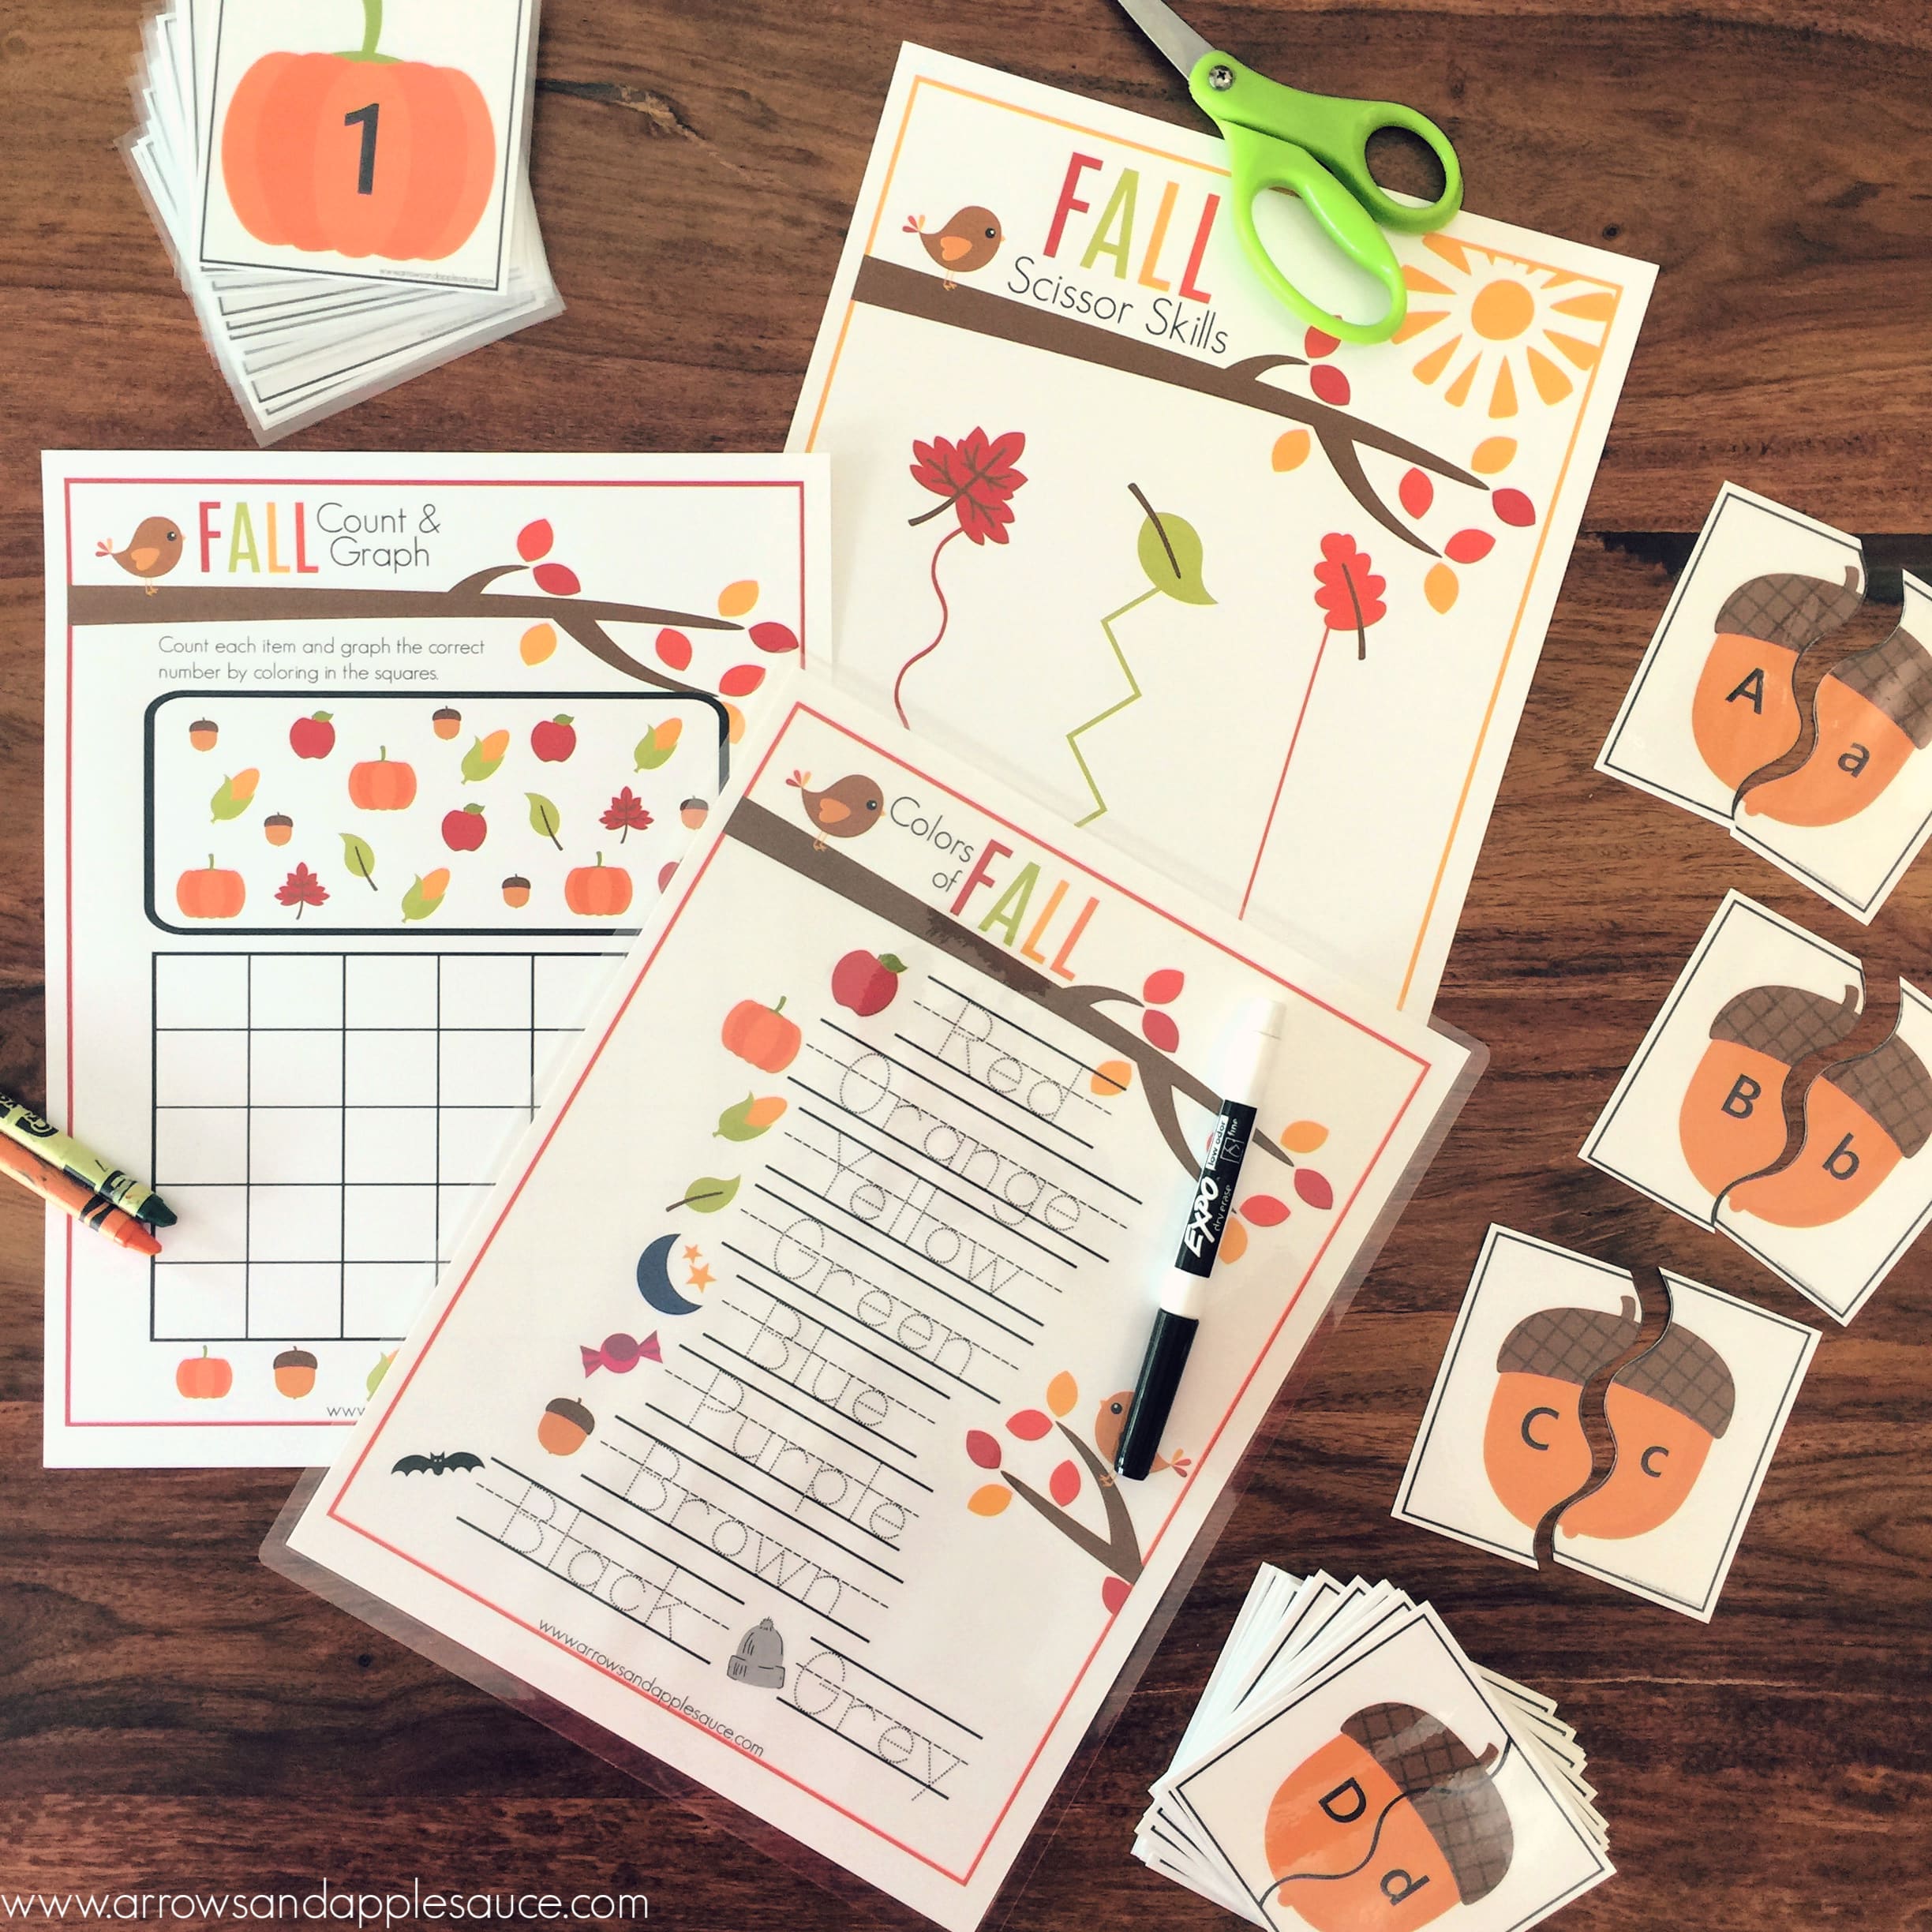 We're adding a little seasonal fun to our homeschool routine with this fun printable fall theme activity bundle. Your preschooler will love it! Practice alphabet matching, scissor skills and fine motor, counting and graphing, number sense, penmanship, and color recognition. #falltheme #preschooltheme #fallpreschoolactivities #fallkidsactivities #printablefallworksheets #homeschoolprintables #alphabetgames #scissorskills #preschoolmath #numbergames #pumpkingames